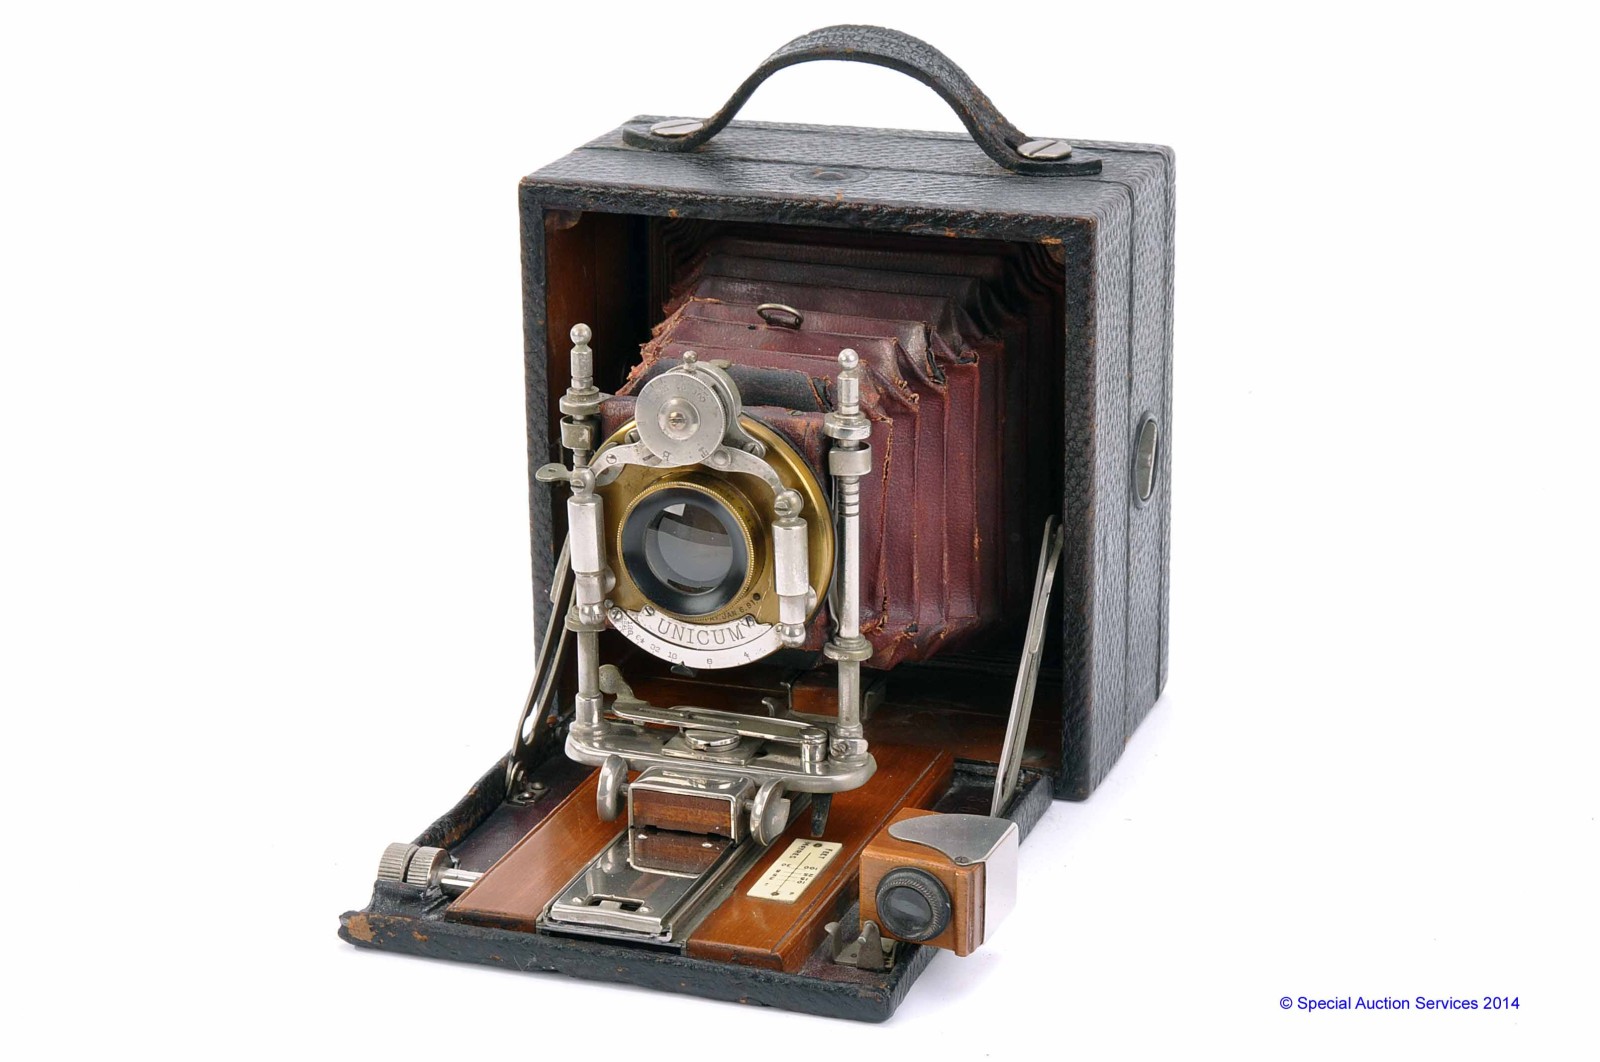 A Kodak No. 3 Plate Camera Series D, with Bausch & Lomb Rapid Rectilinear lens, body, G, heavy